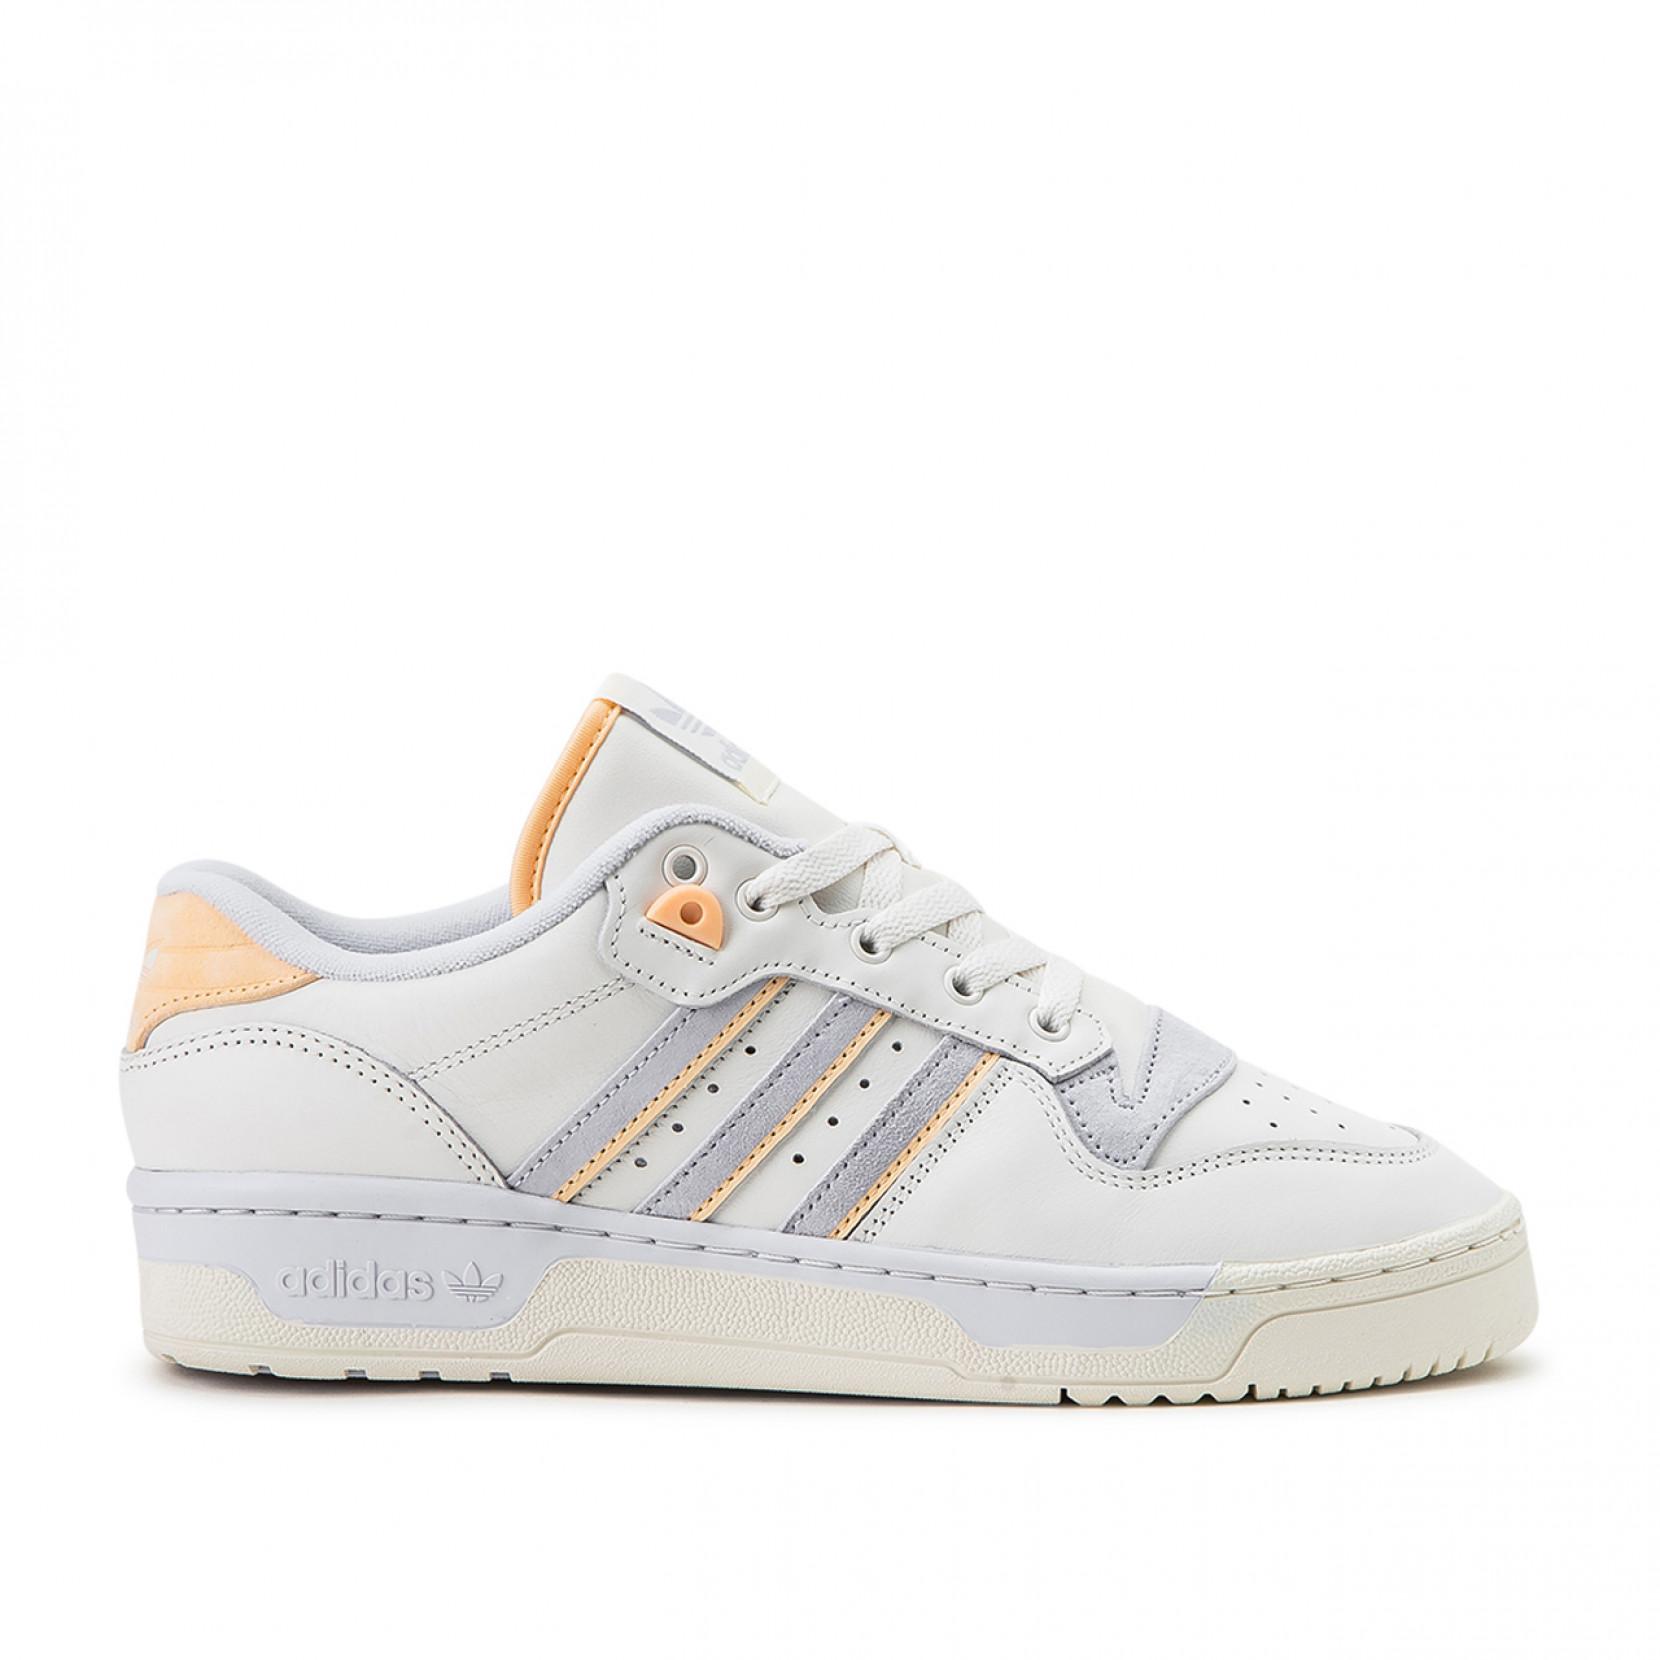 adidas Leather Rivalry Low in White for Men - Lyst